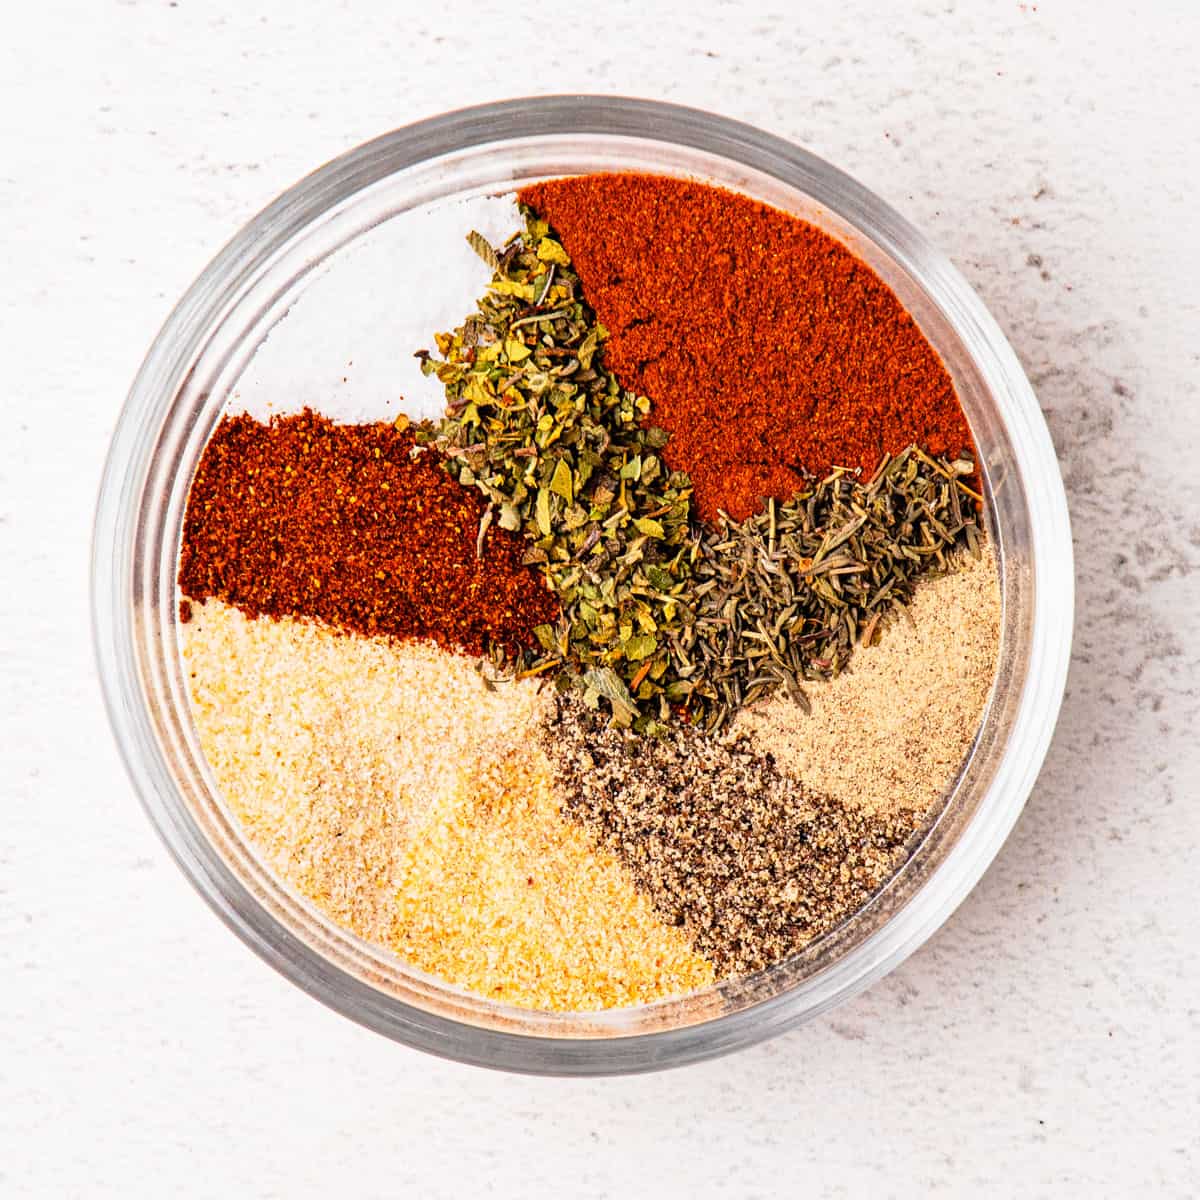 A variety of seasonings in a small bowl before being mixed together.